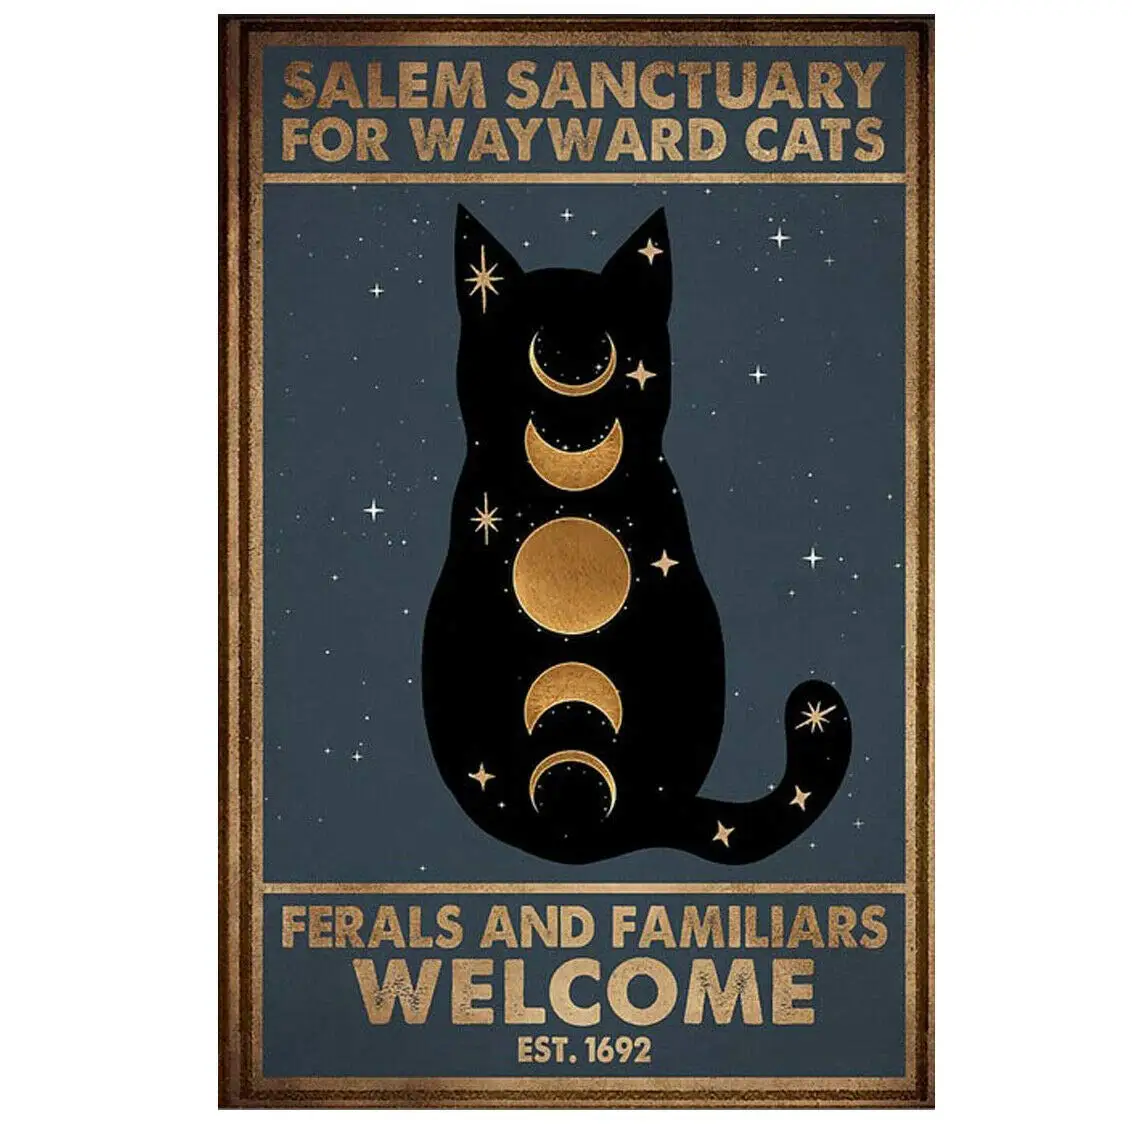 

For Wayward Cats Ferals and Familiars Black Cat Poster Tin Sign Them Metal Tin Sign Wall Decor for Bars Restaurants Cafes Pubs-M